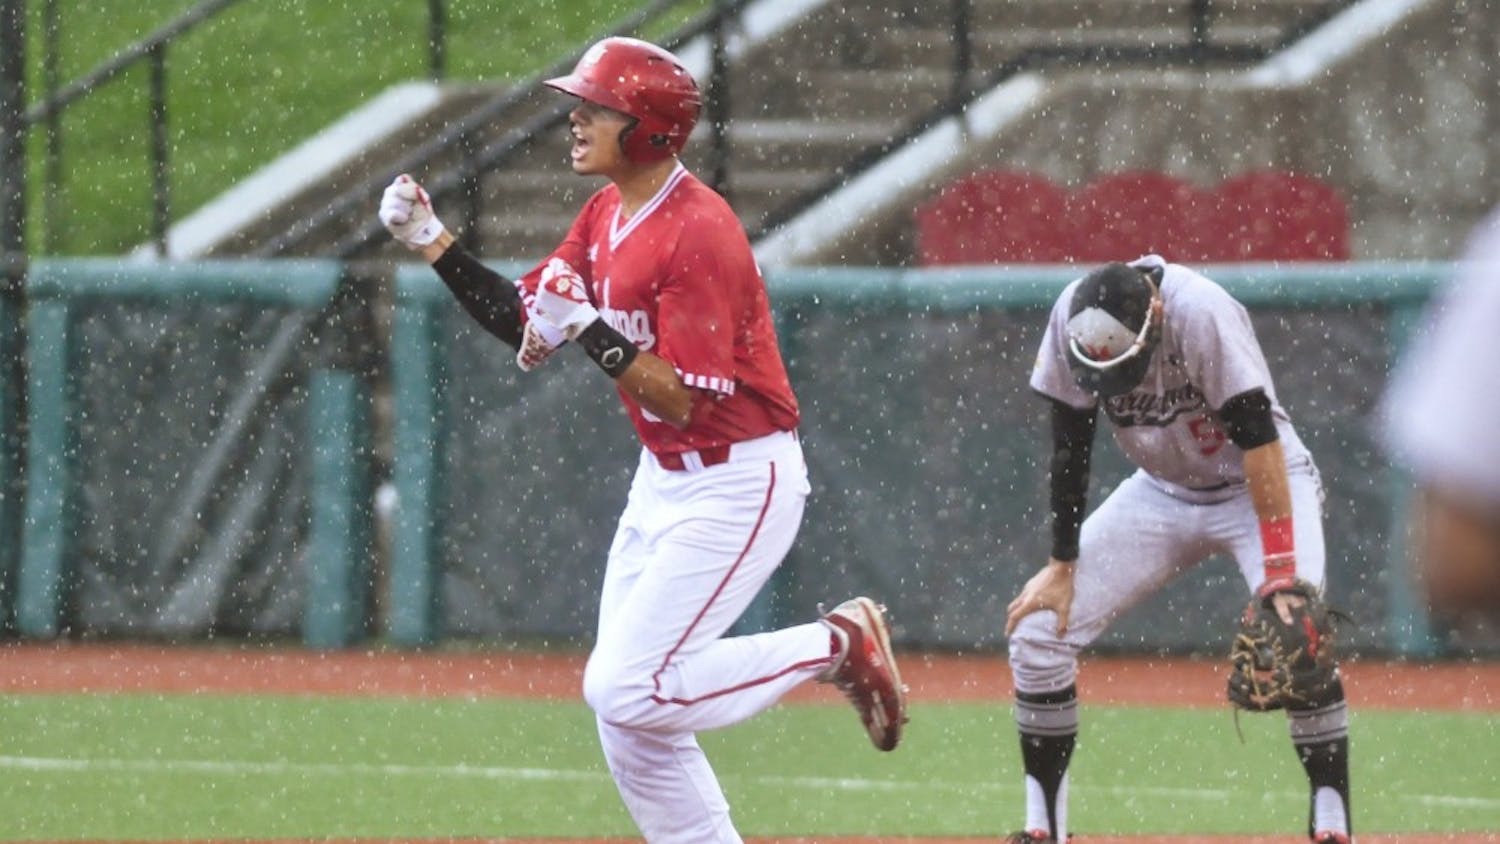 Craig Dedelow hits a grand slam in the rain in the seventh inning of game 3 against Maryland. Dedelow's grand slam gave IU a 6-3 lead immediately before the game entered a weather delay.